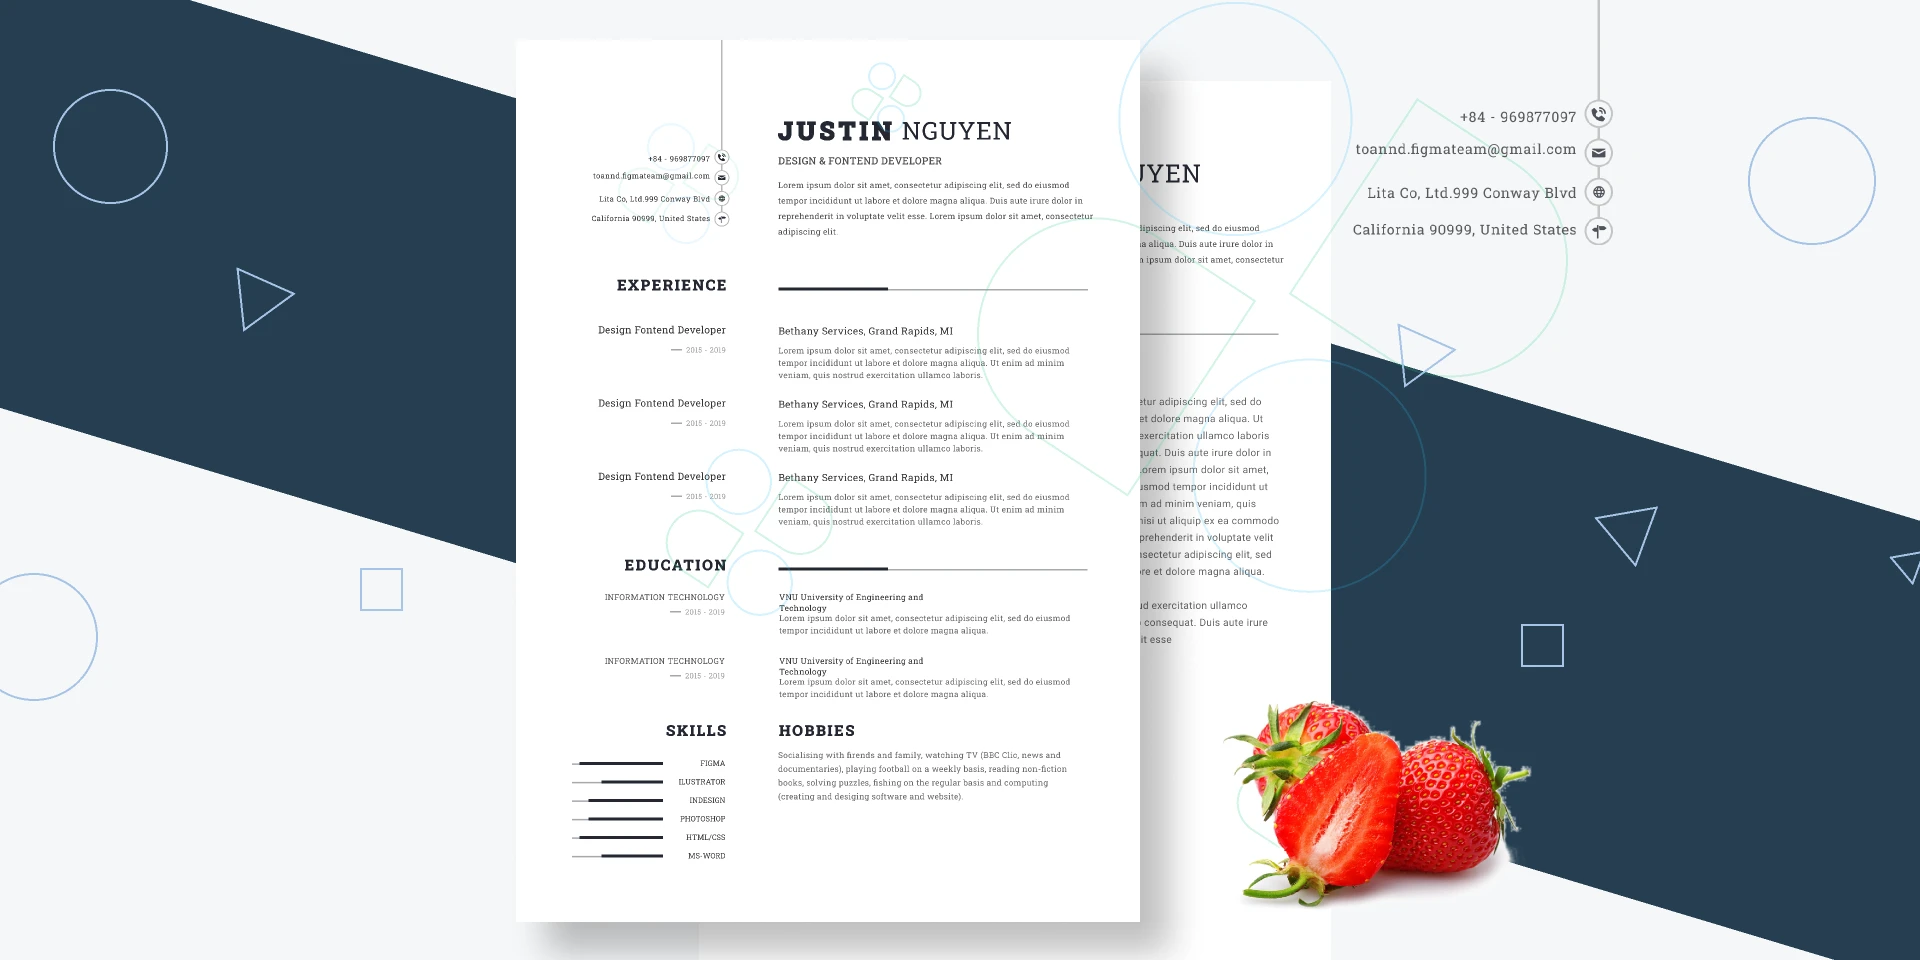 Resume CV simple for Figma and Adobe XD